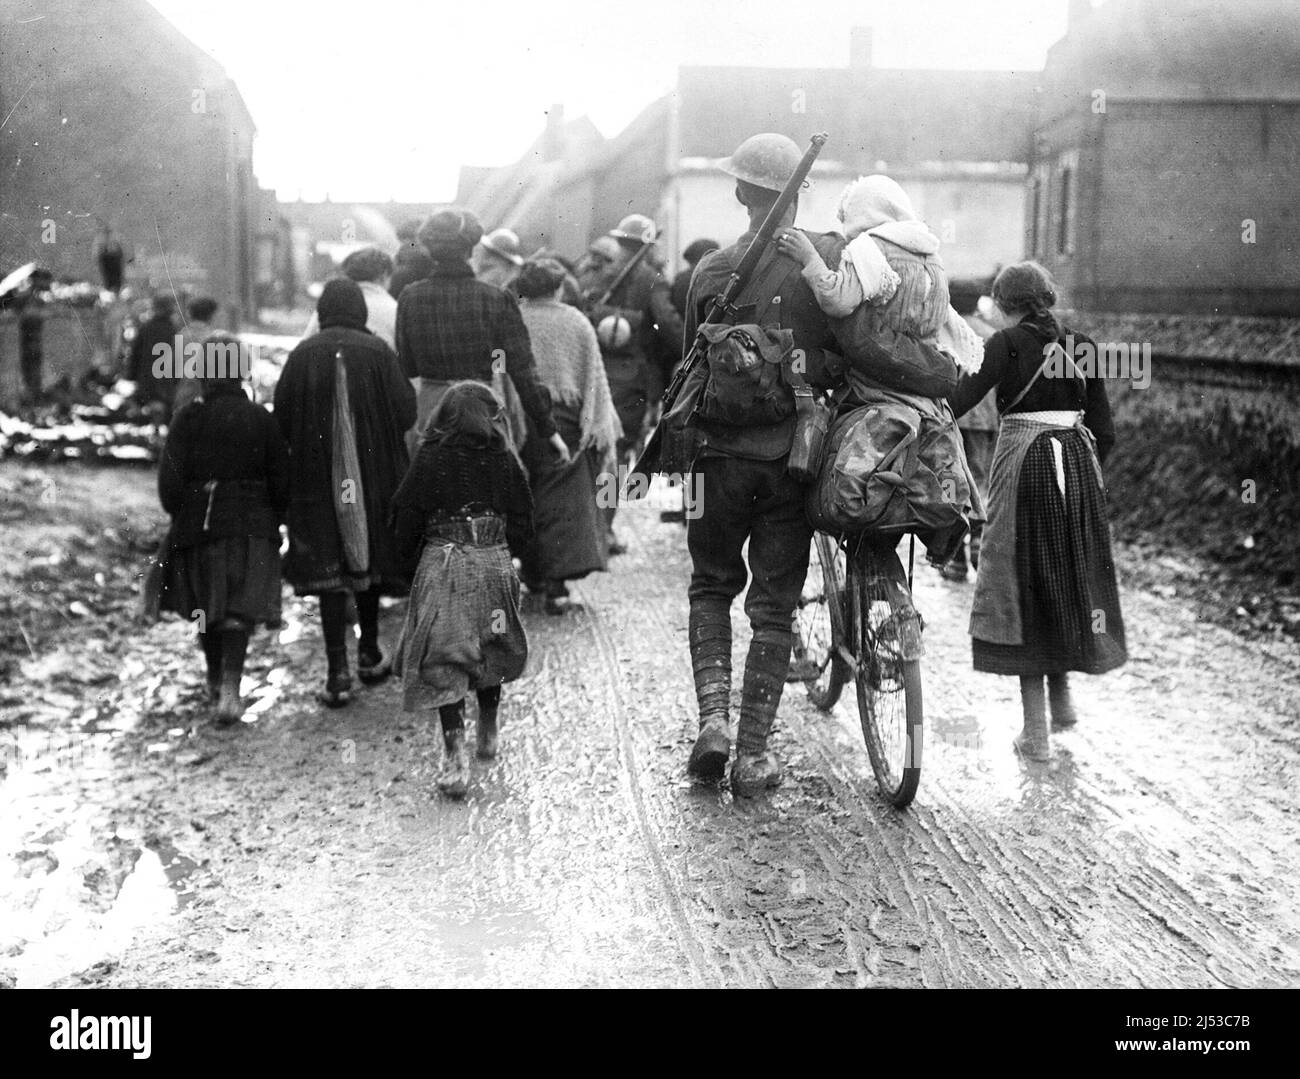 British soldiers arriving in a village in France. They are surrounded by women and children. One soldier has lifted a young girl onto his bicycle. T Stock Photo